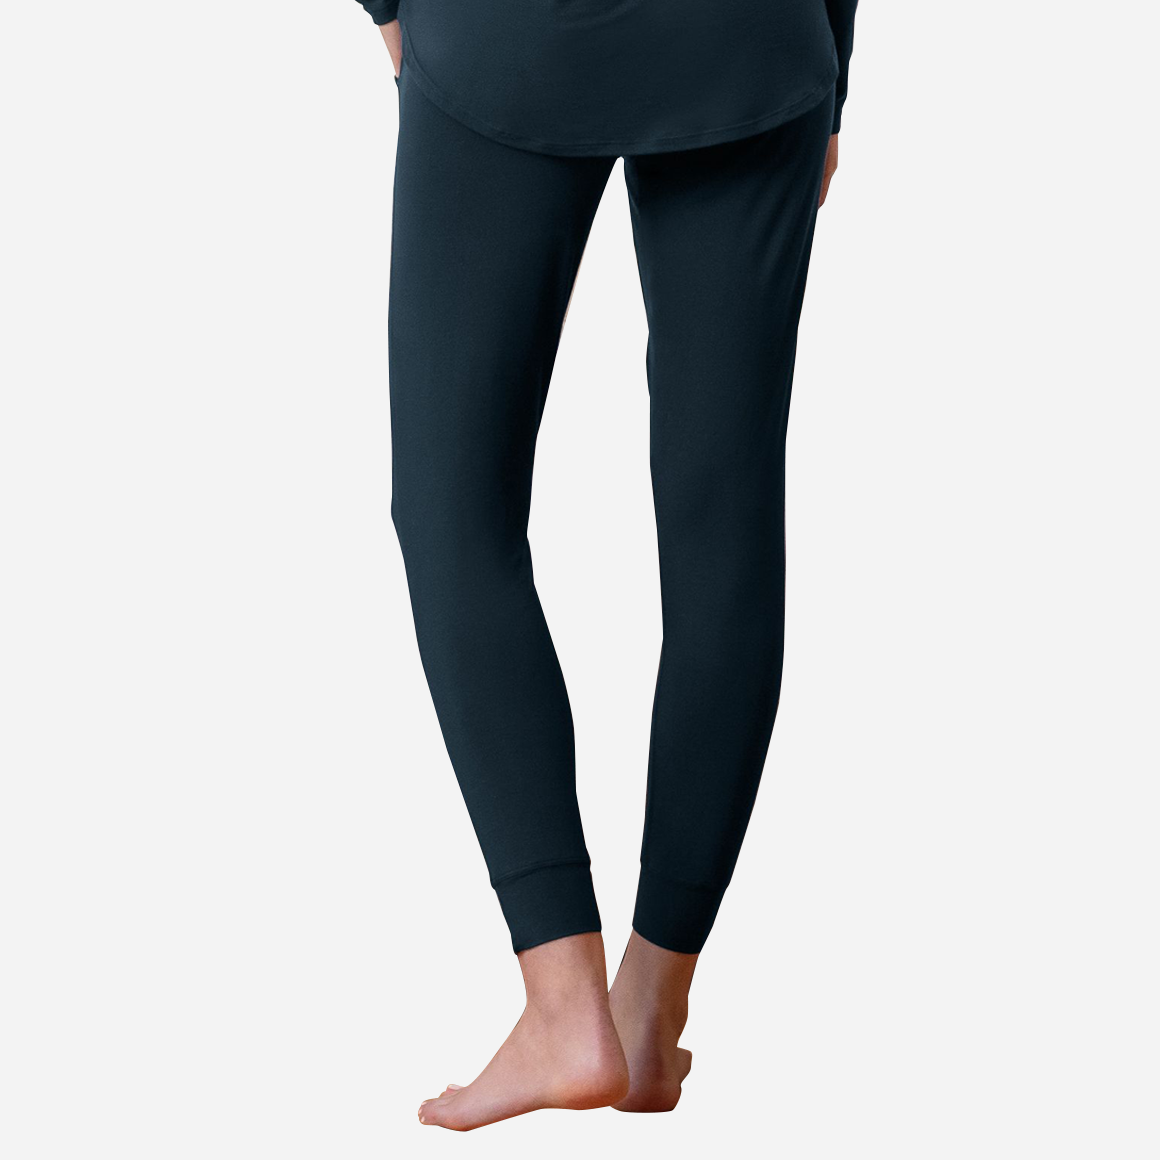 Dark Blue lounge and sleep pant on rear-facing model slim fitting and tapered legs with elasticated ankle cuff. 